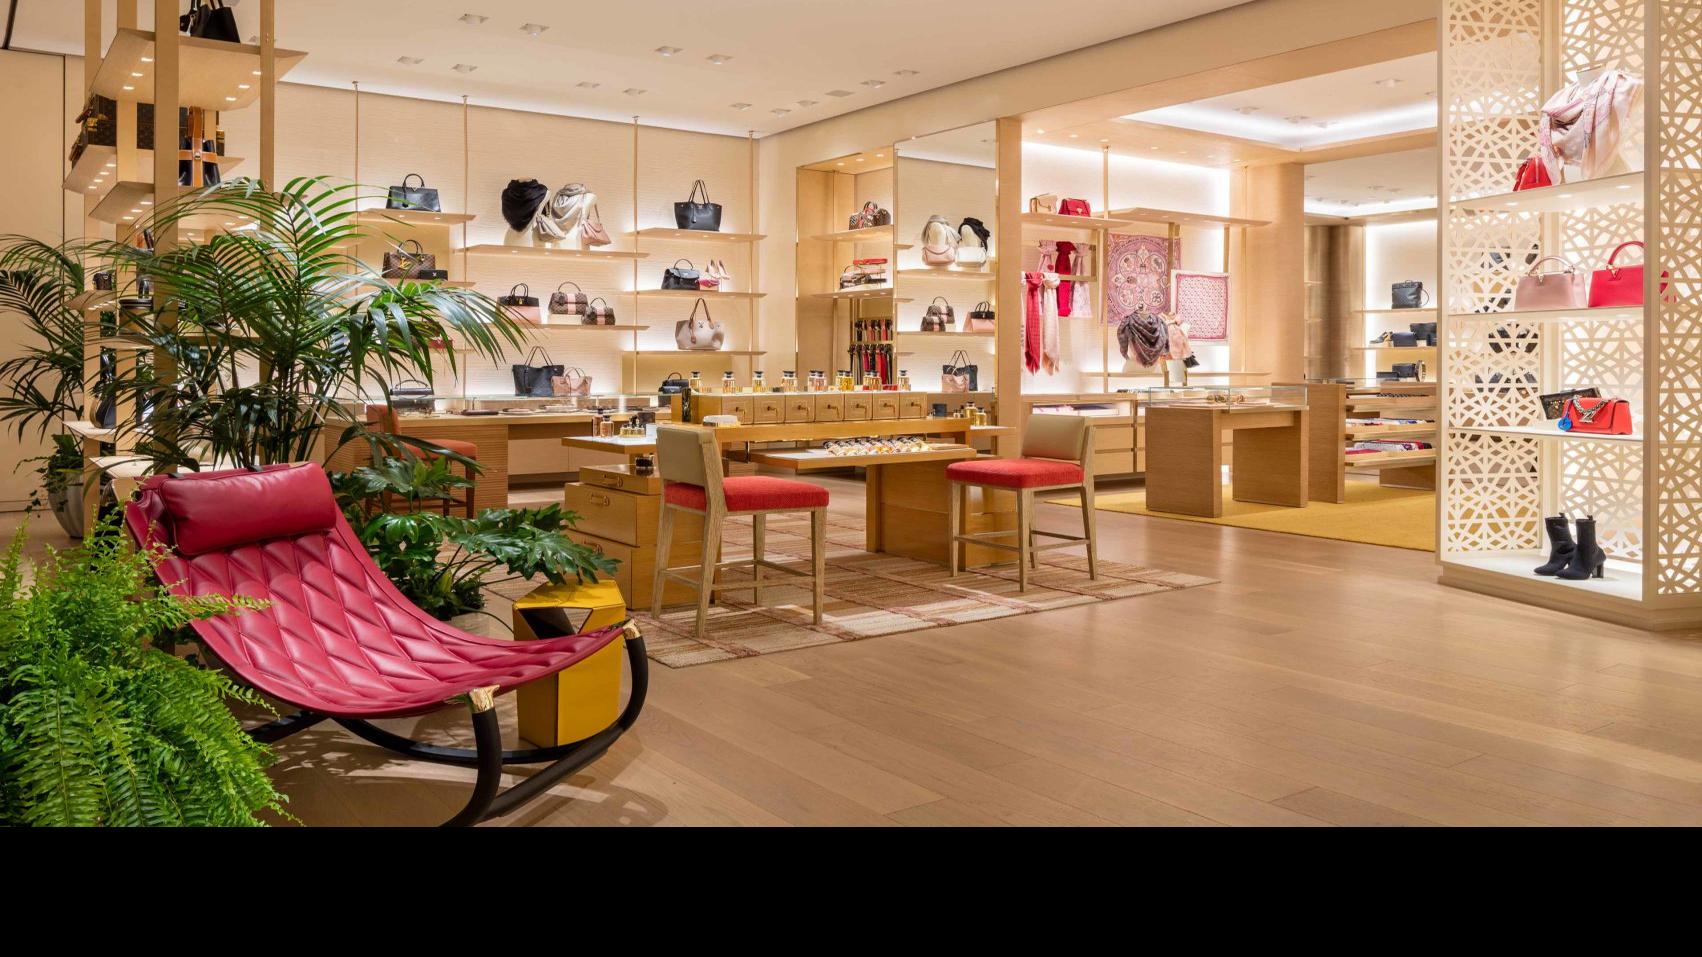 Louis Vuitton Mall Locations